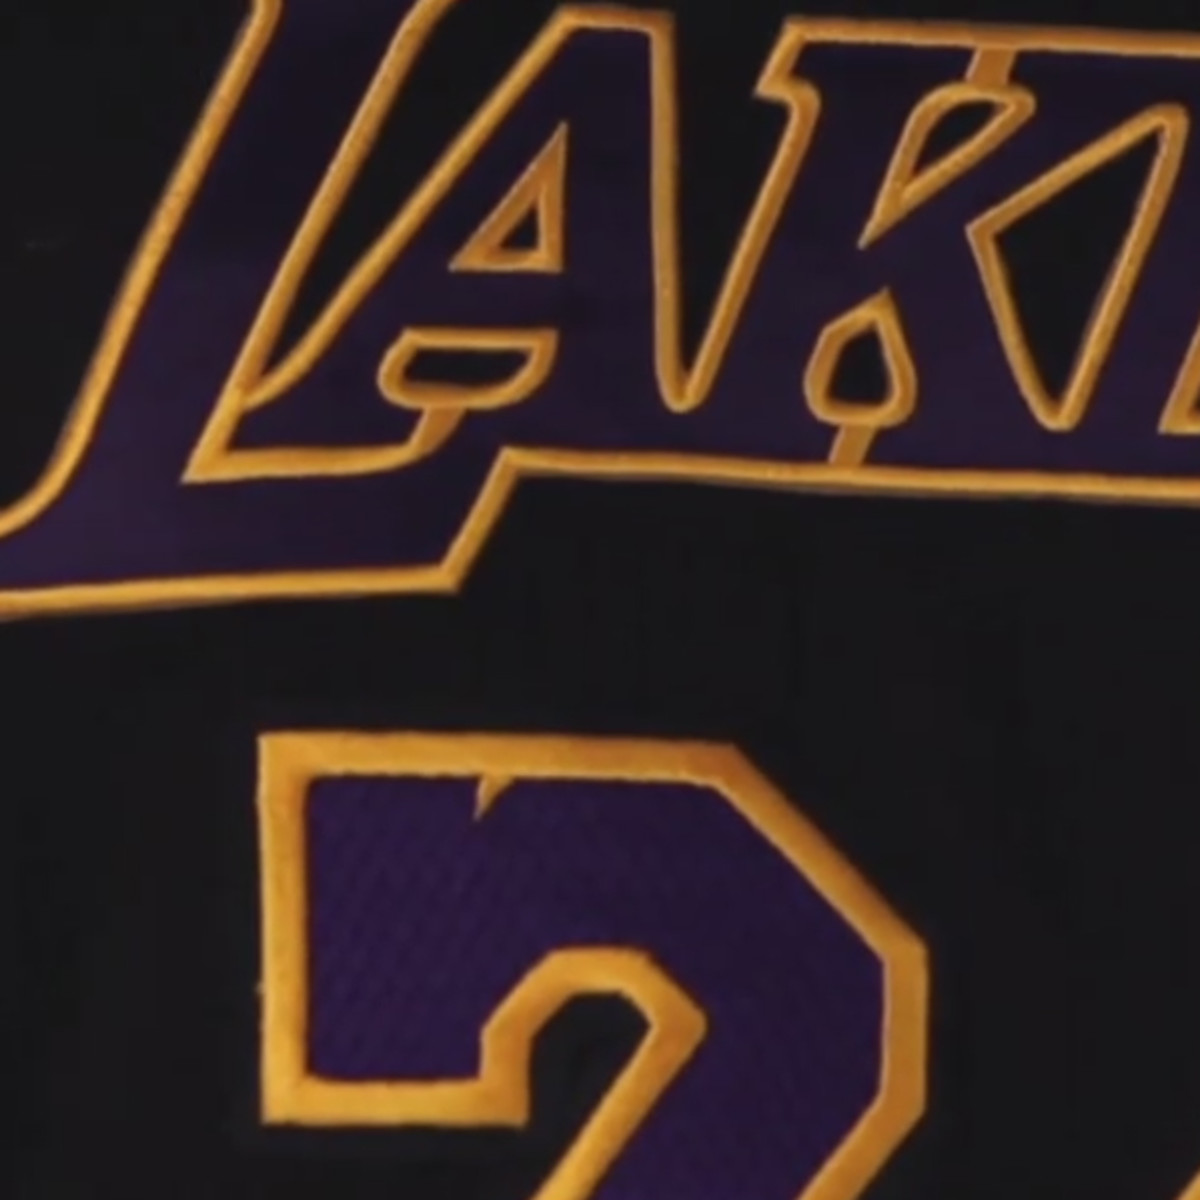 Utah Jazz tease new City jerseys with awesome video